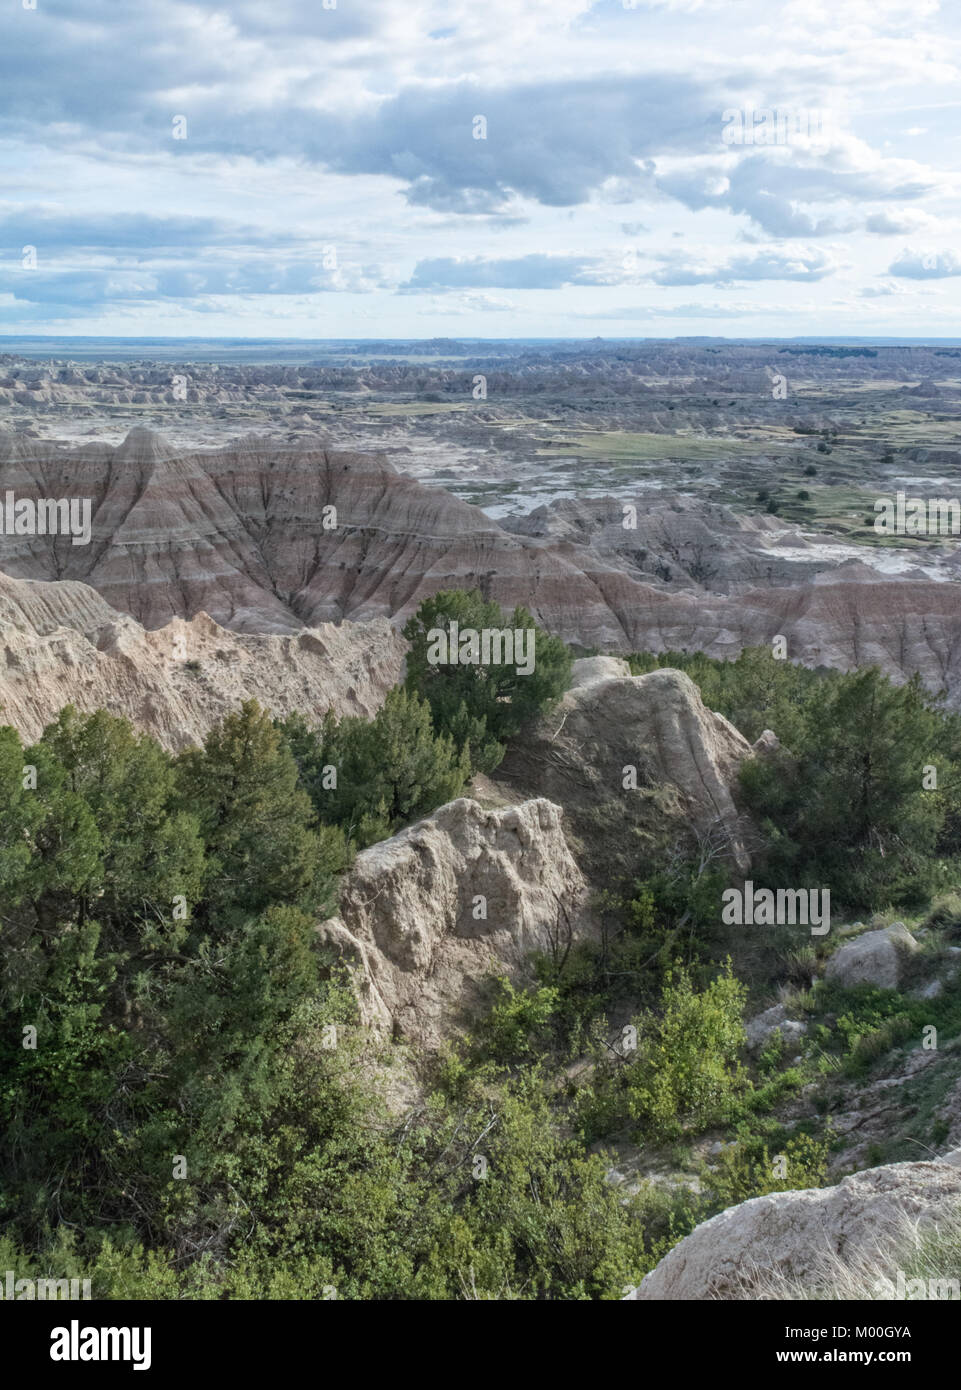 Trees and brush have found a foothold within a valley surounded by sandstone hills. Stock Photo